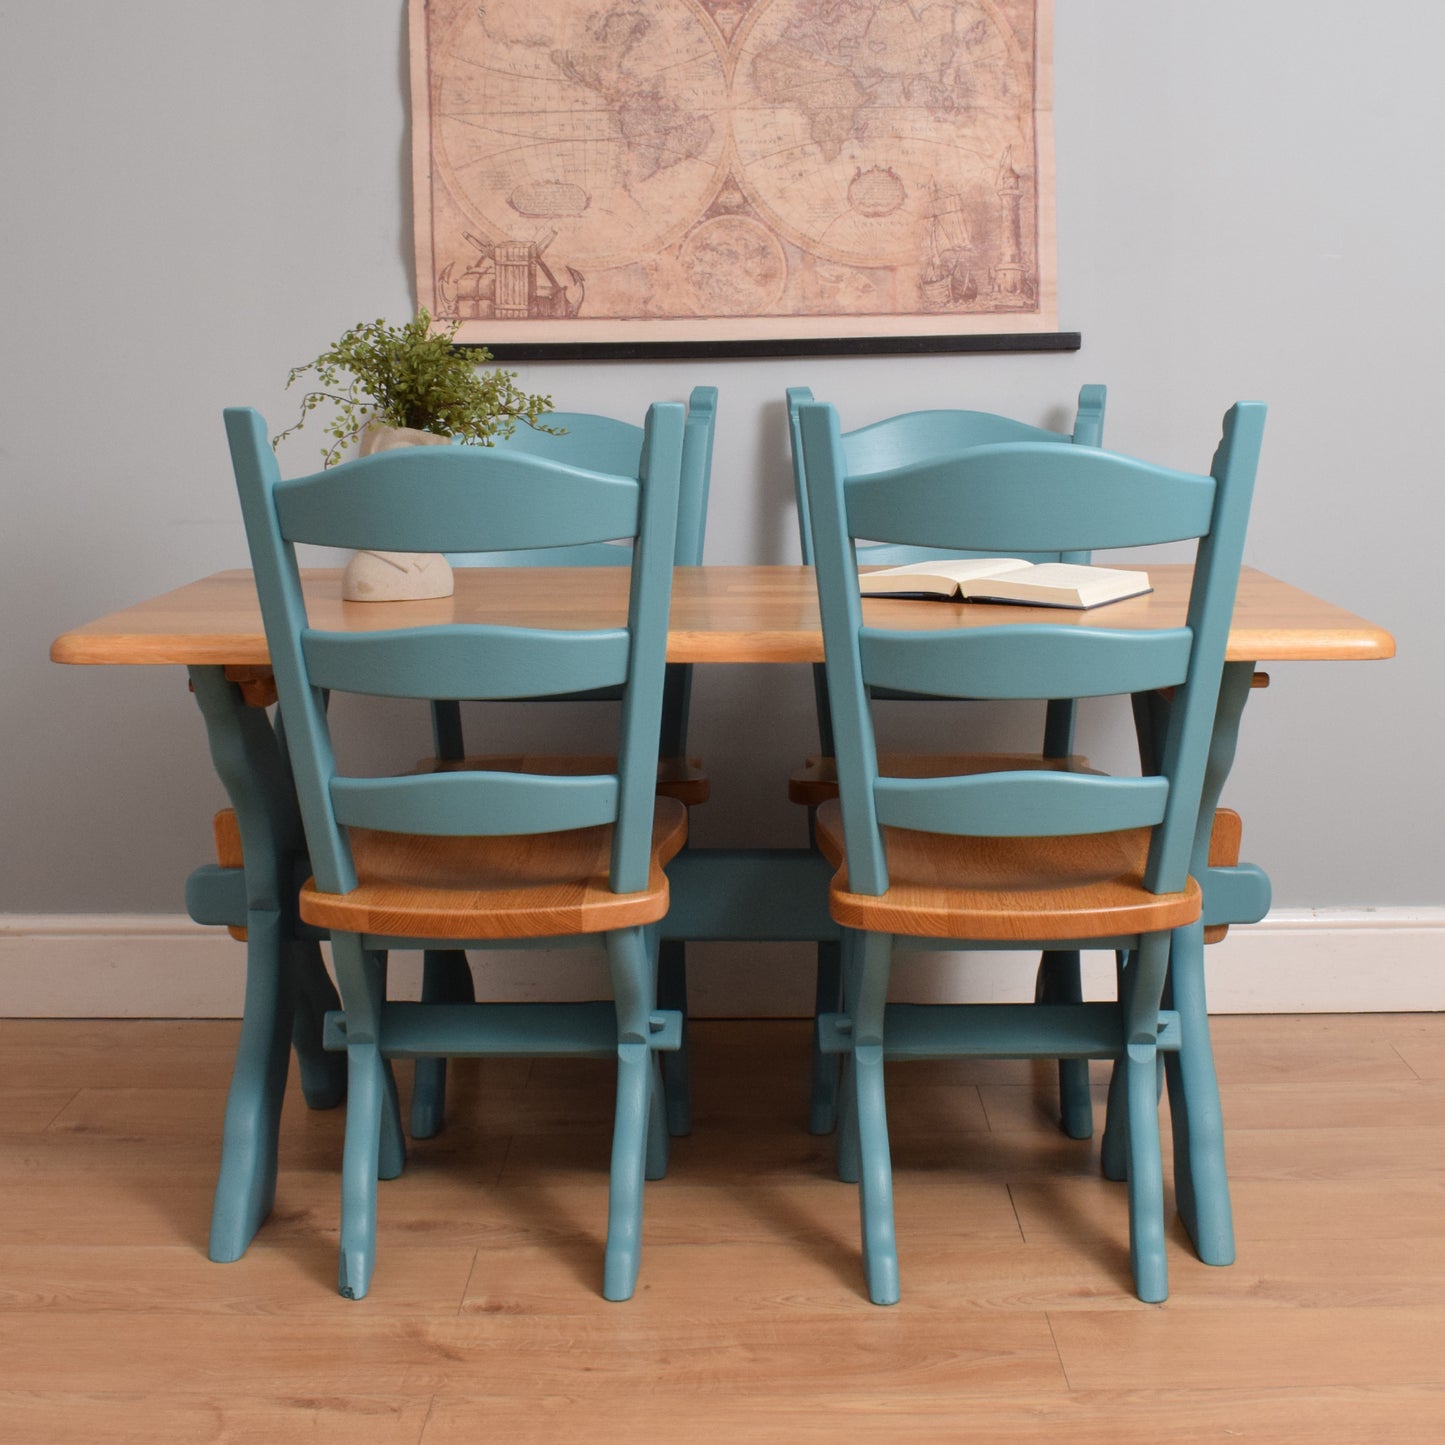 Painted Oak Table and Four Chairs